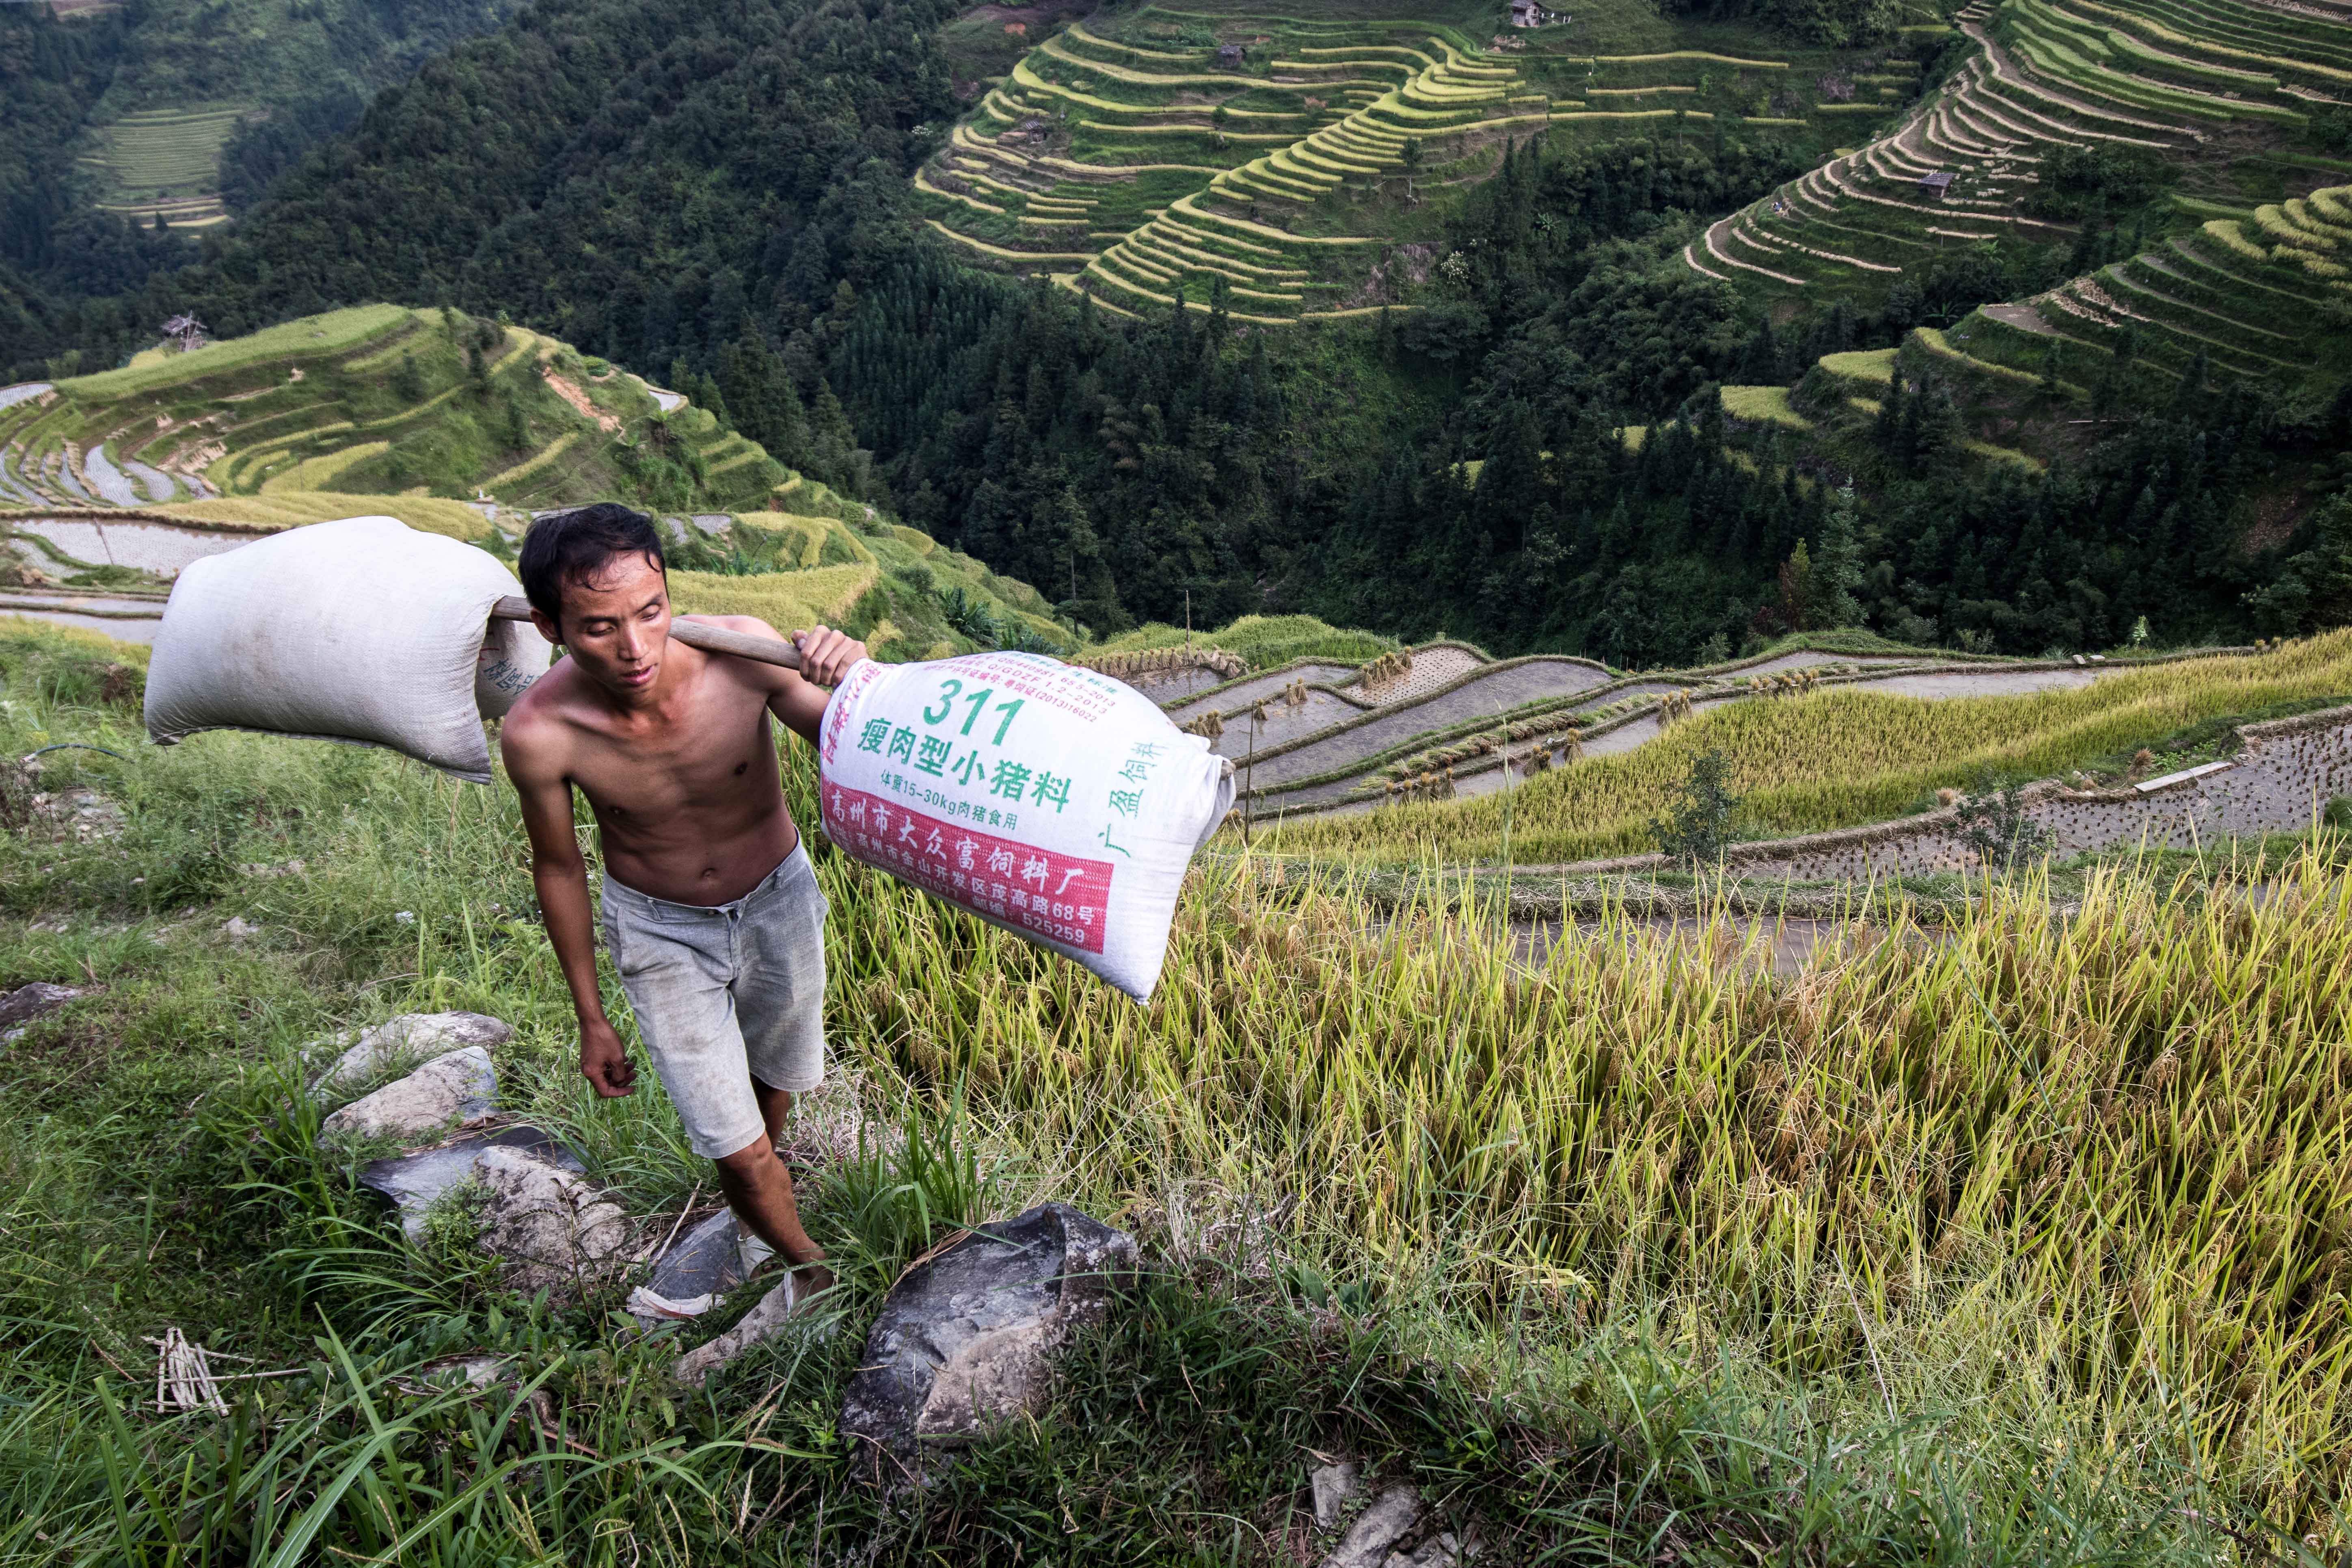 Cultivation, harvest and rice production are part of a millenary cycle which takes place in rice terraces, the symbol of the linking between men and nature.